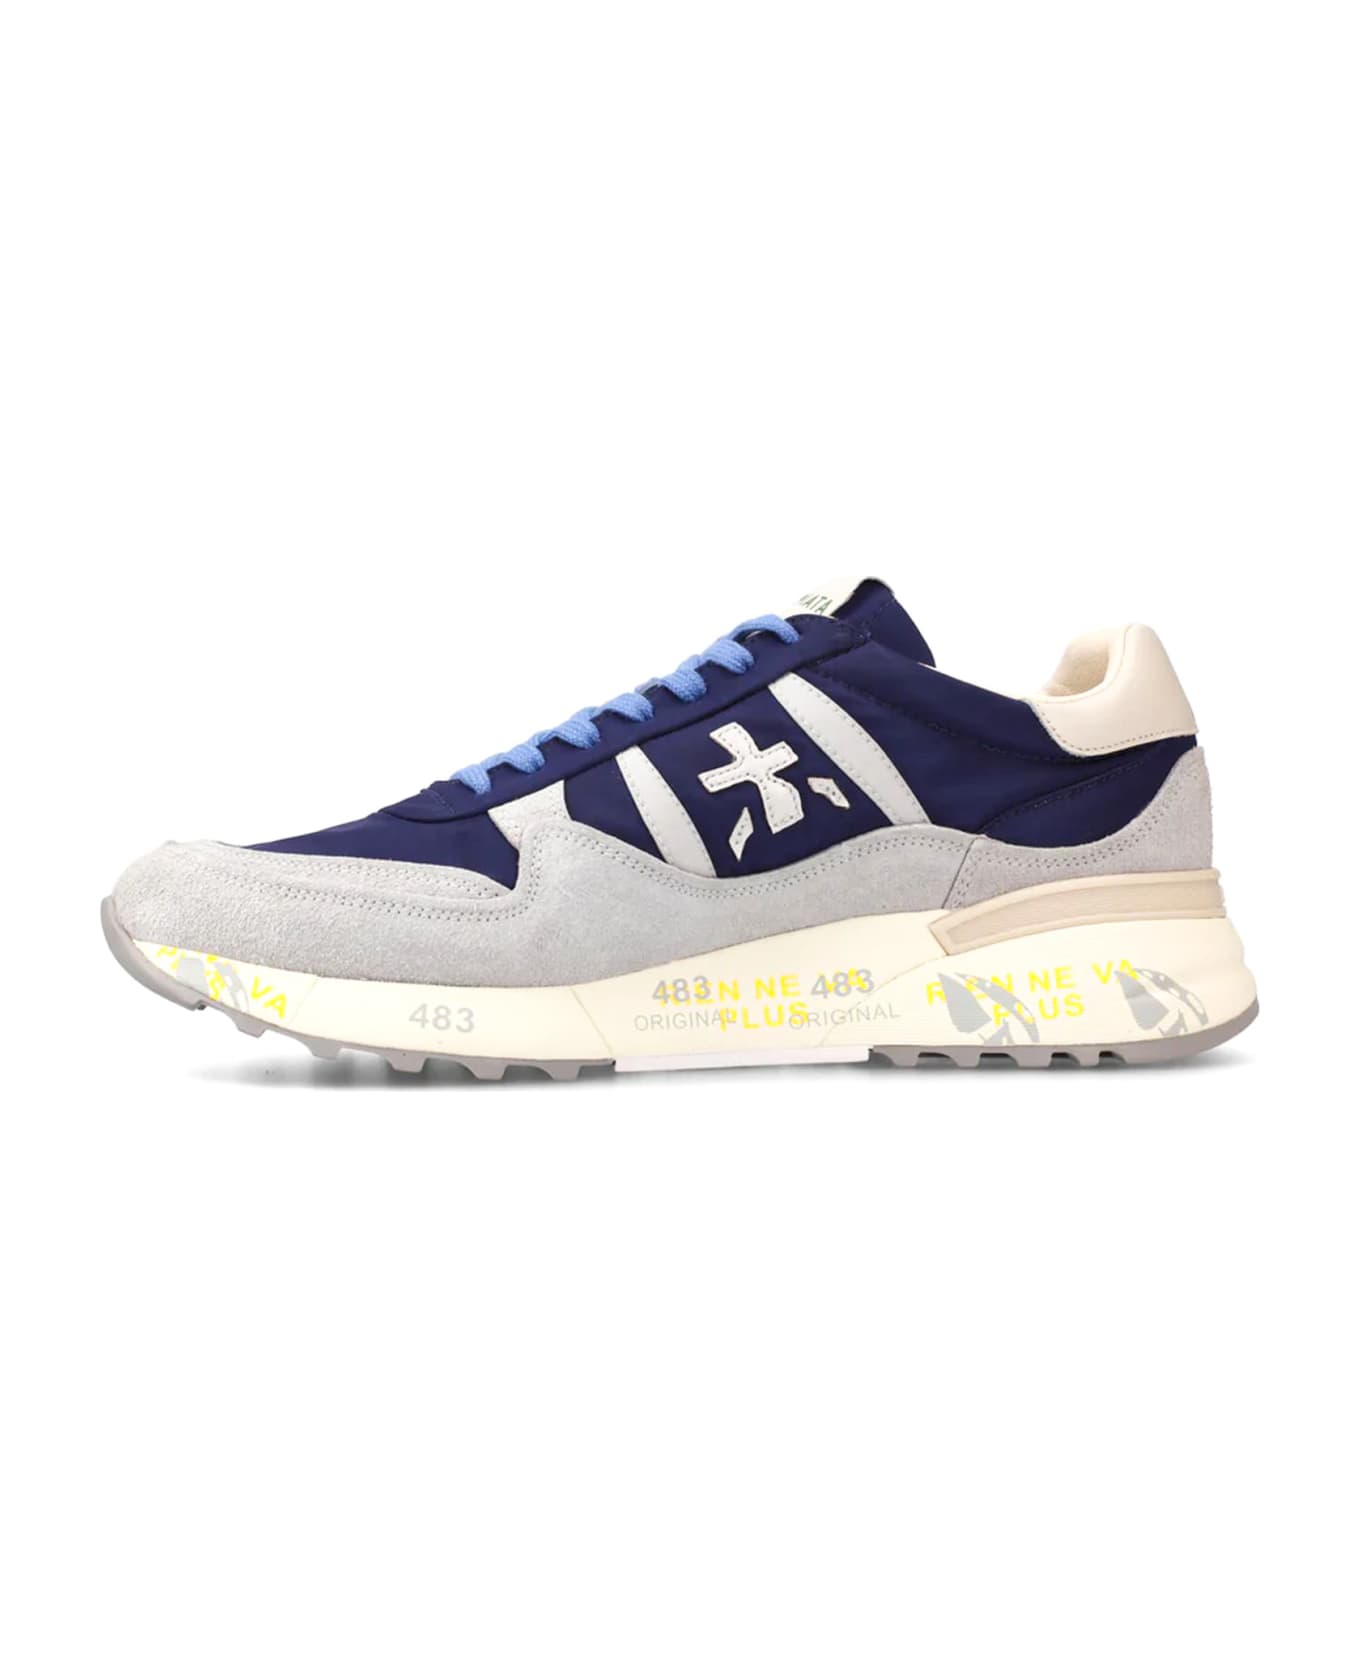 Premiata Landeck Sneakers In Blue Suede And Fabric - Blue/grey スニーカー